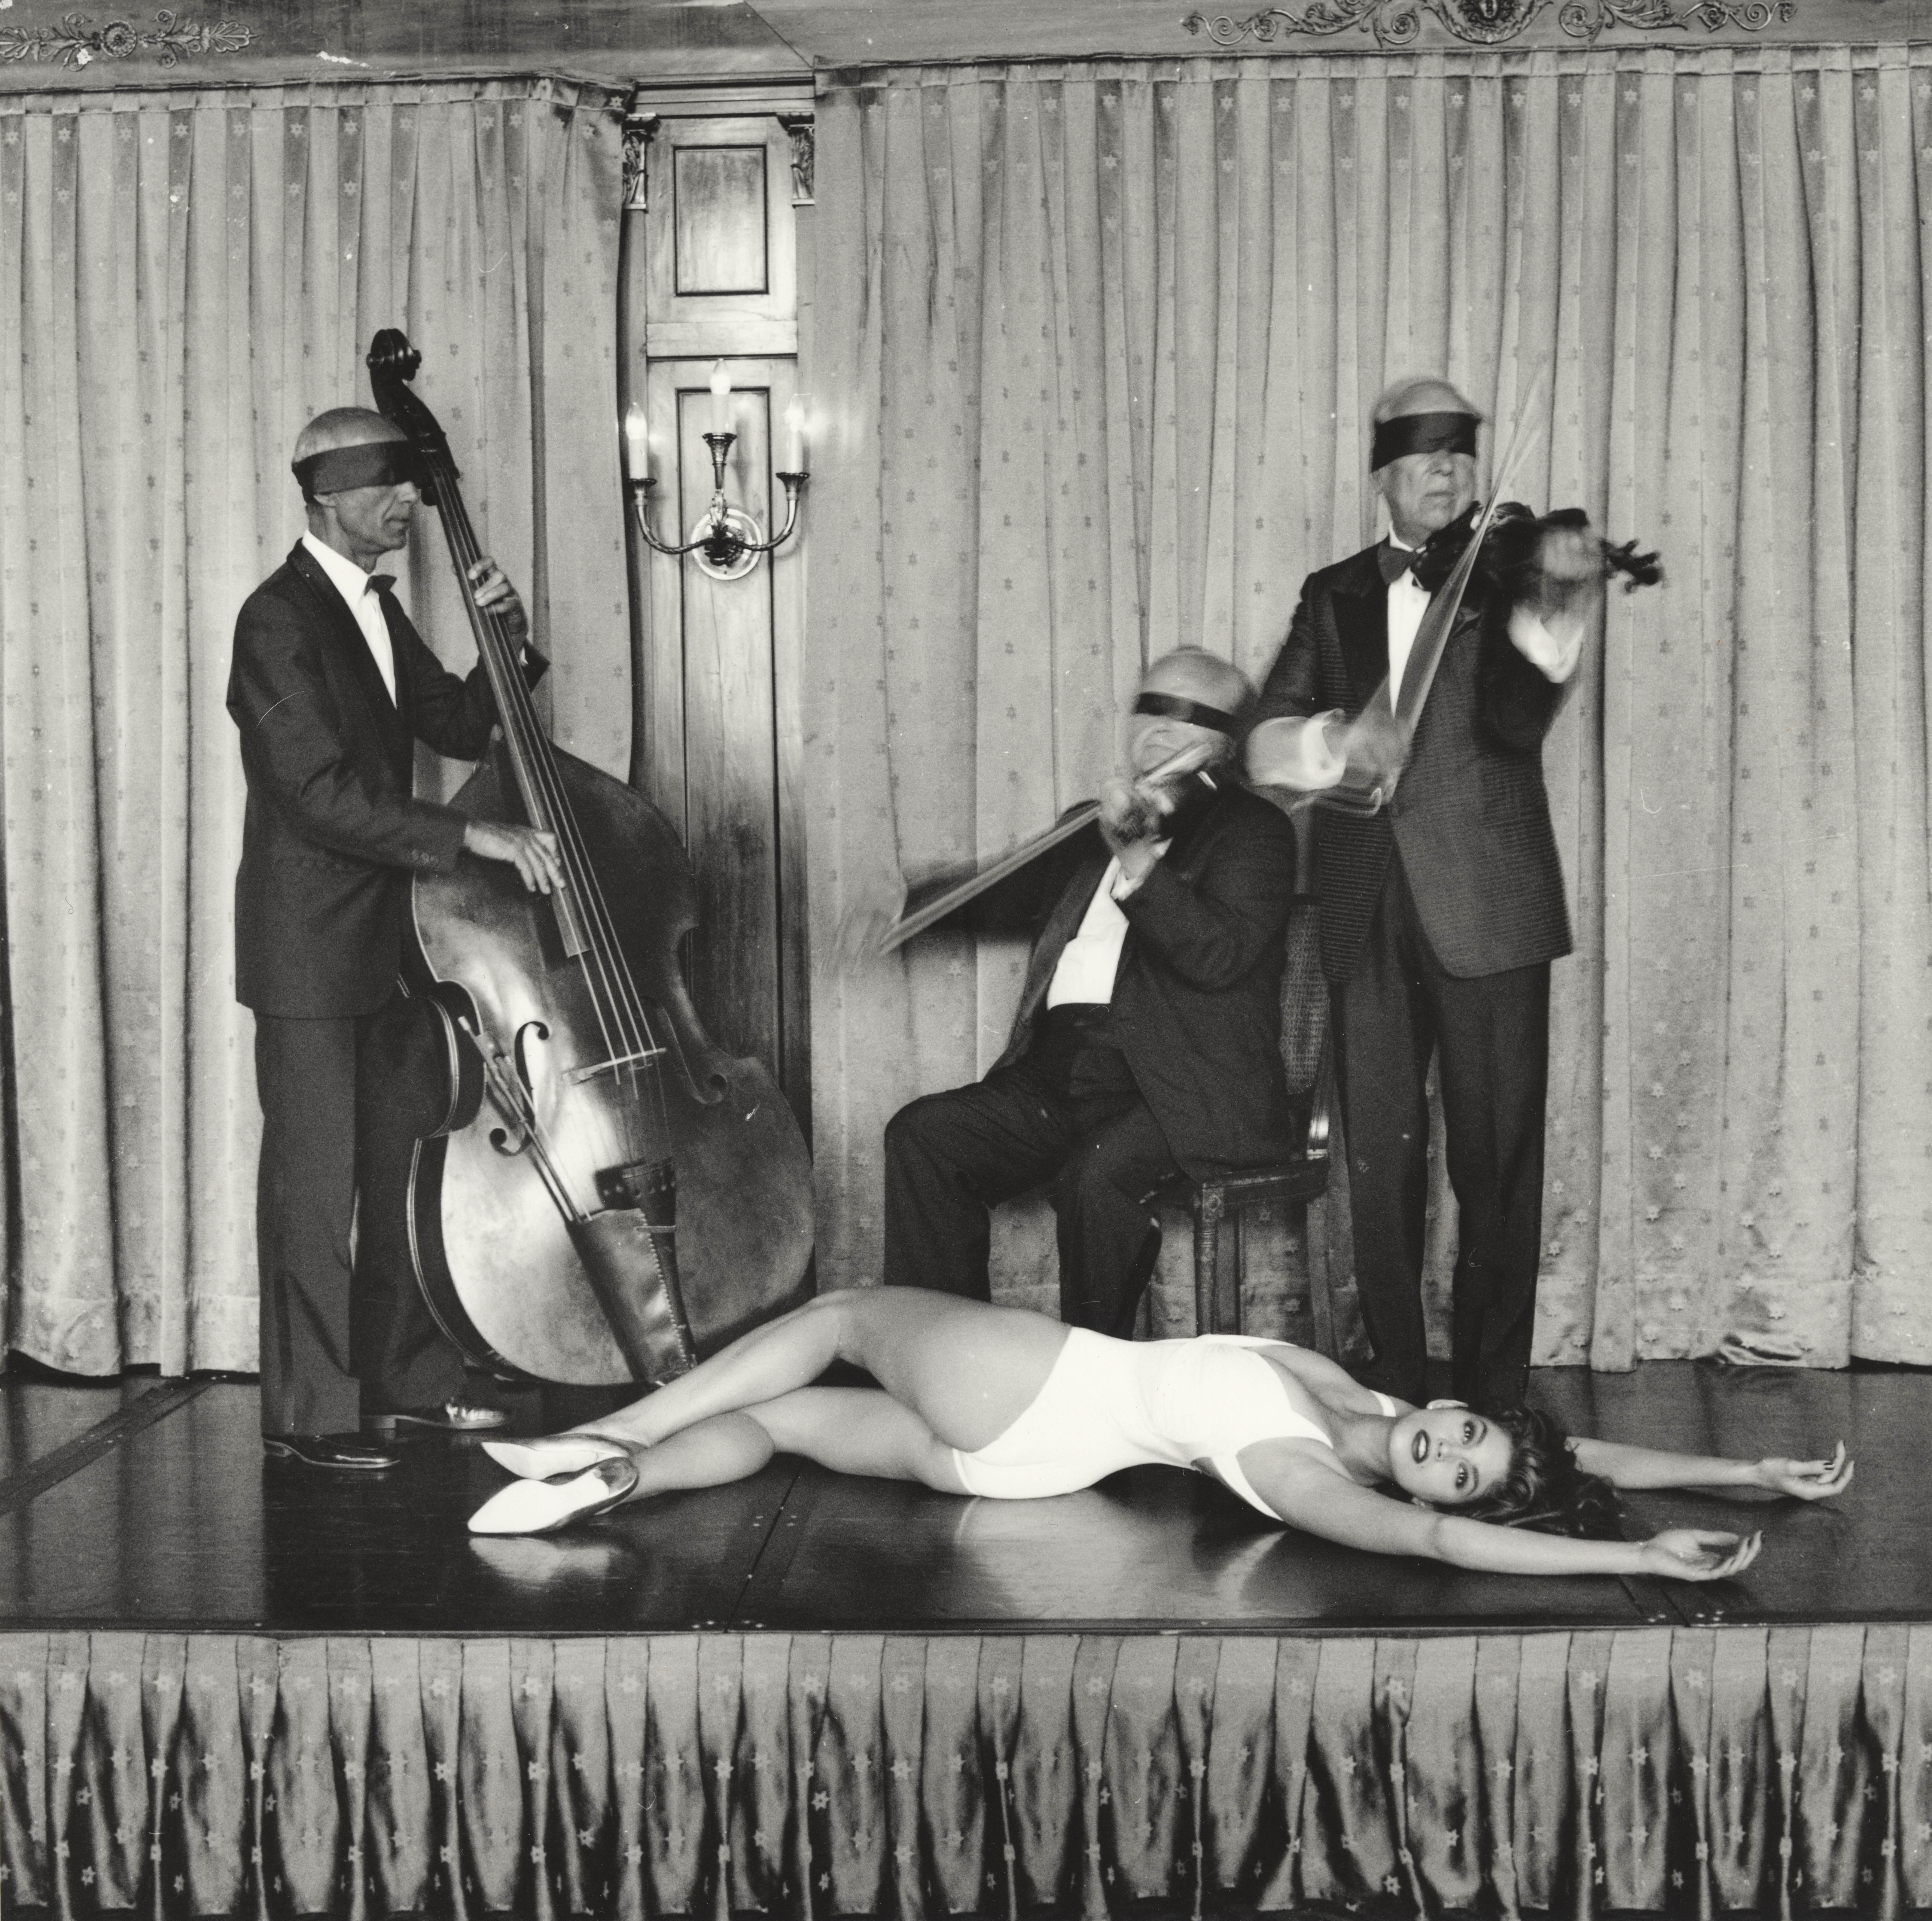 a model lies on a stage in front of a band playing with blindfolds